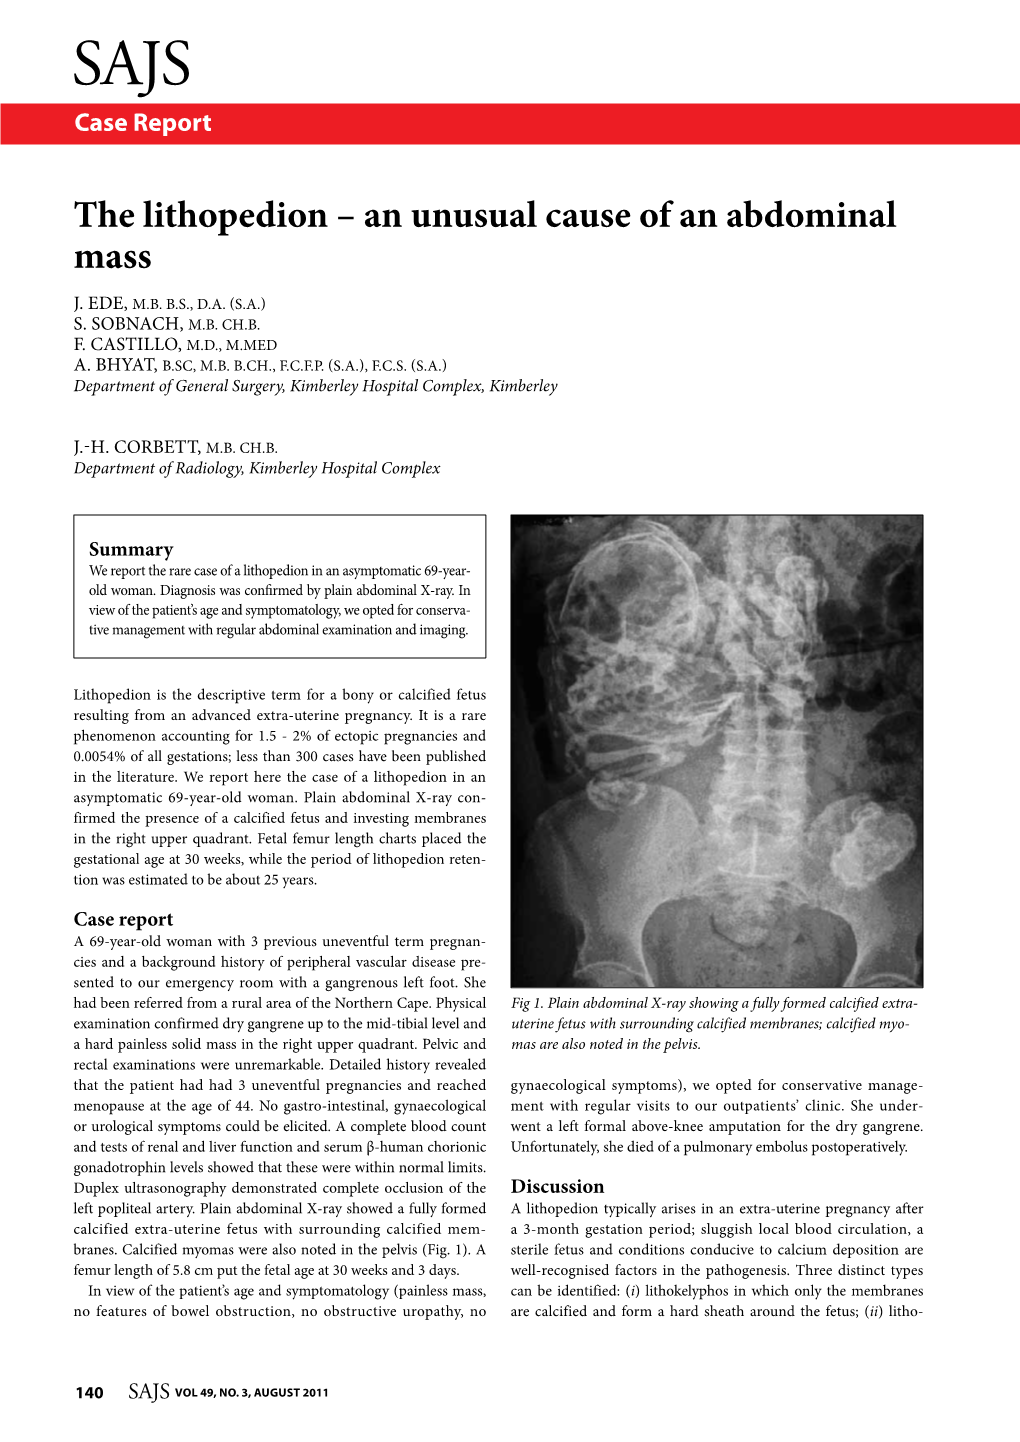 The Lithopedion – an Unusual Cause of an Abdominal Mass